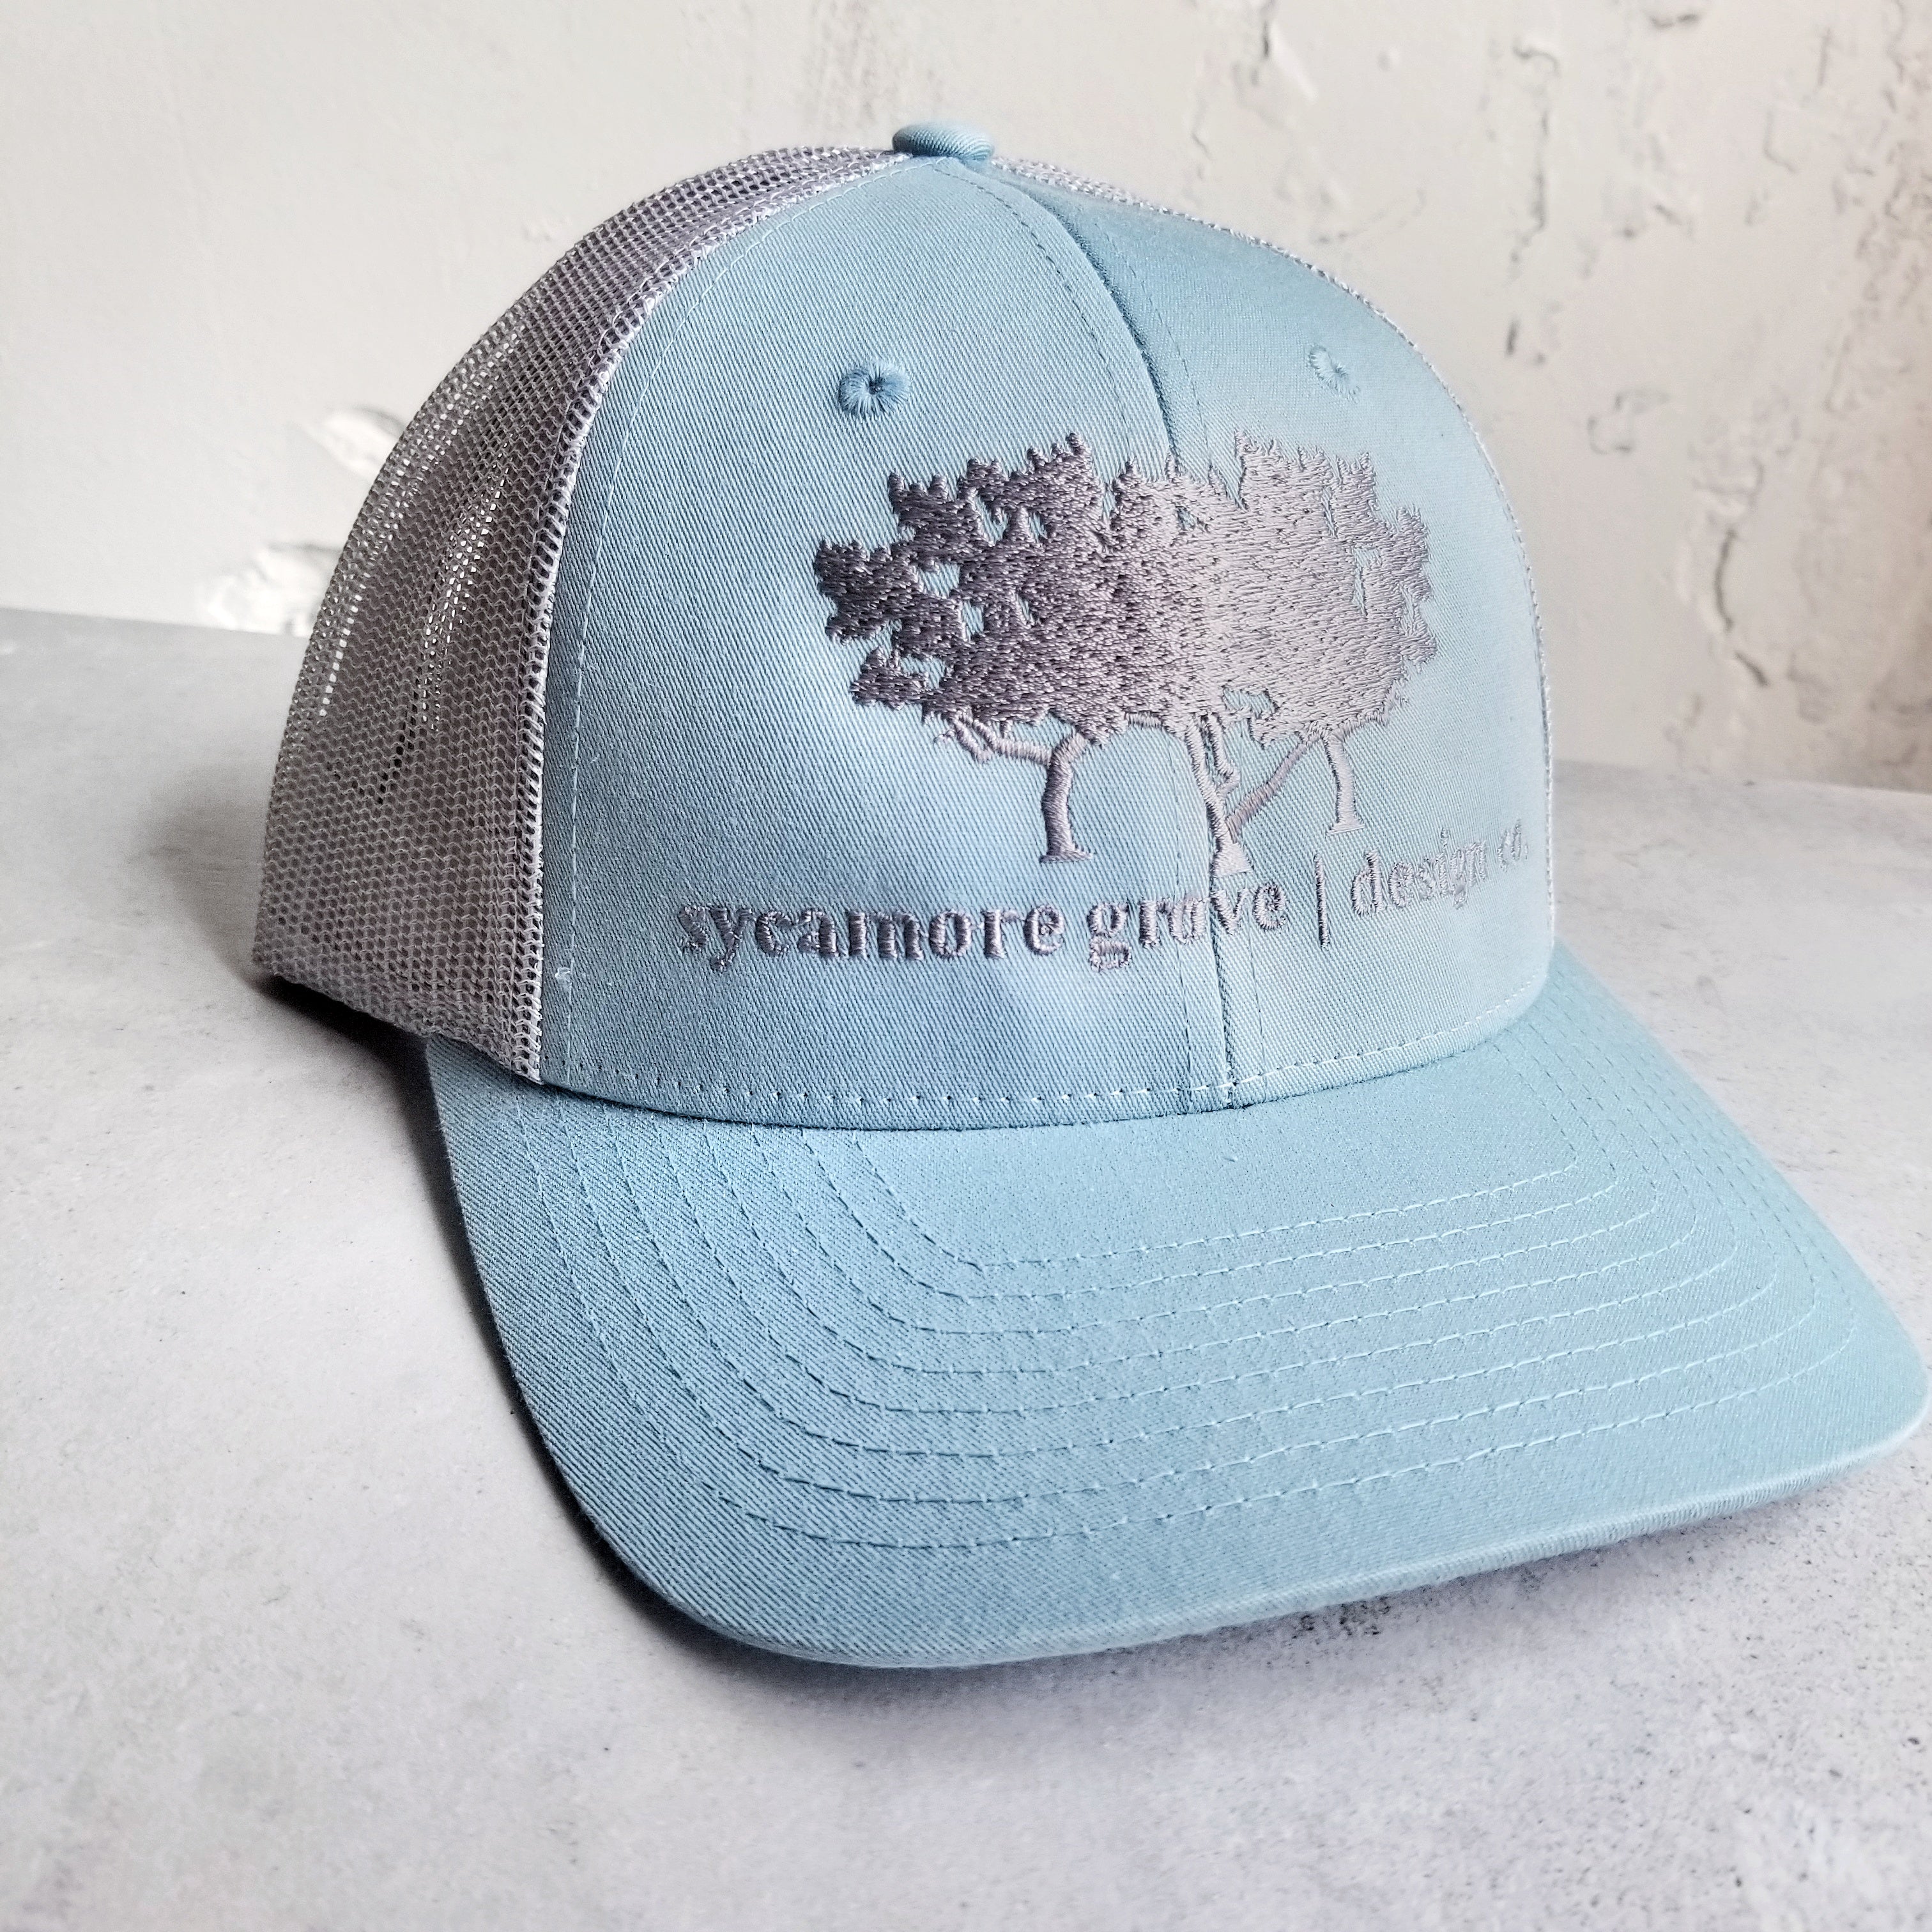 Sycamore Grove Hat